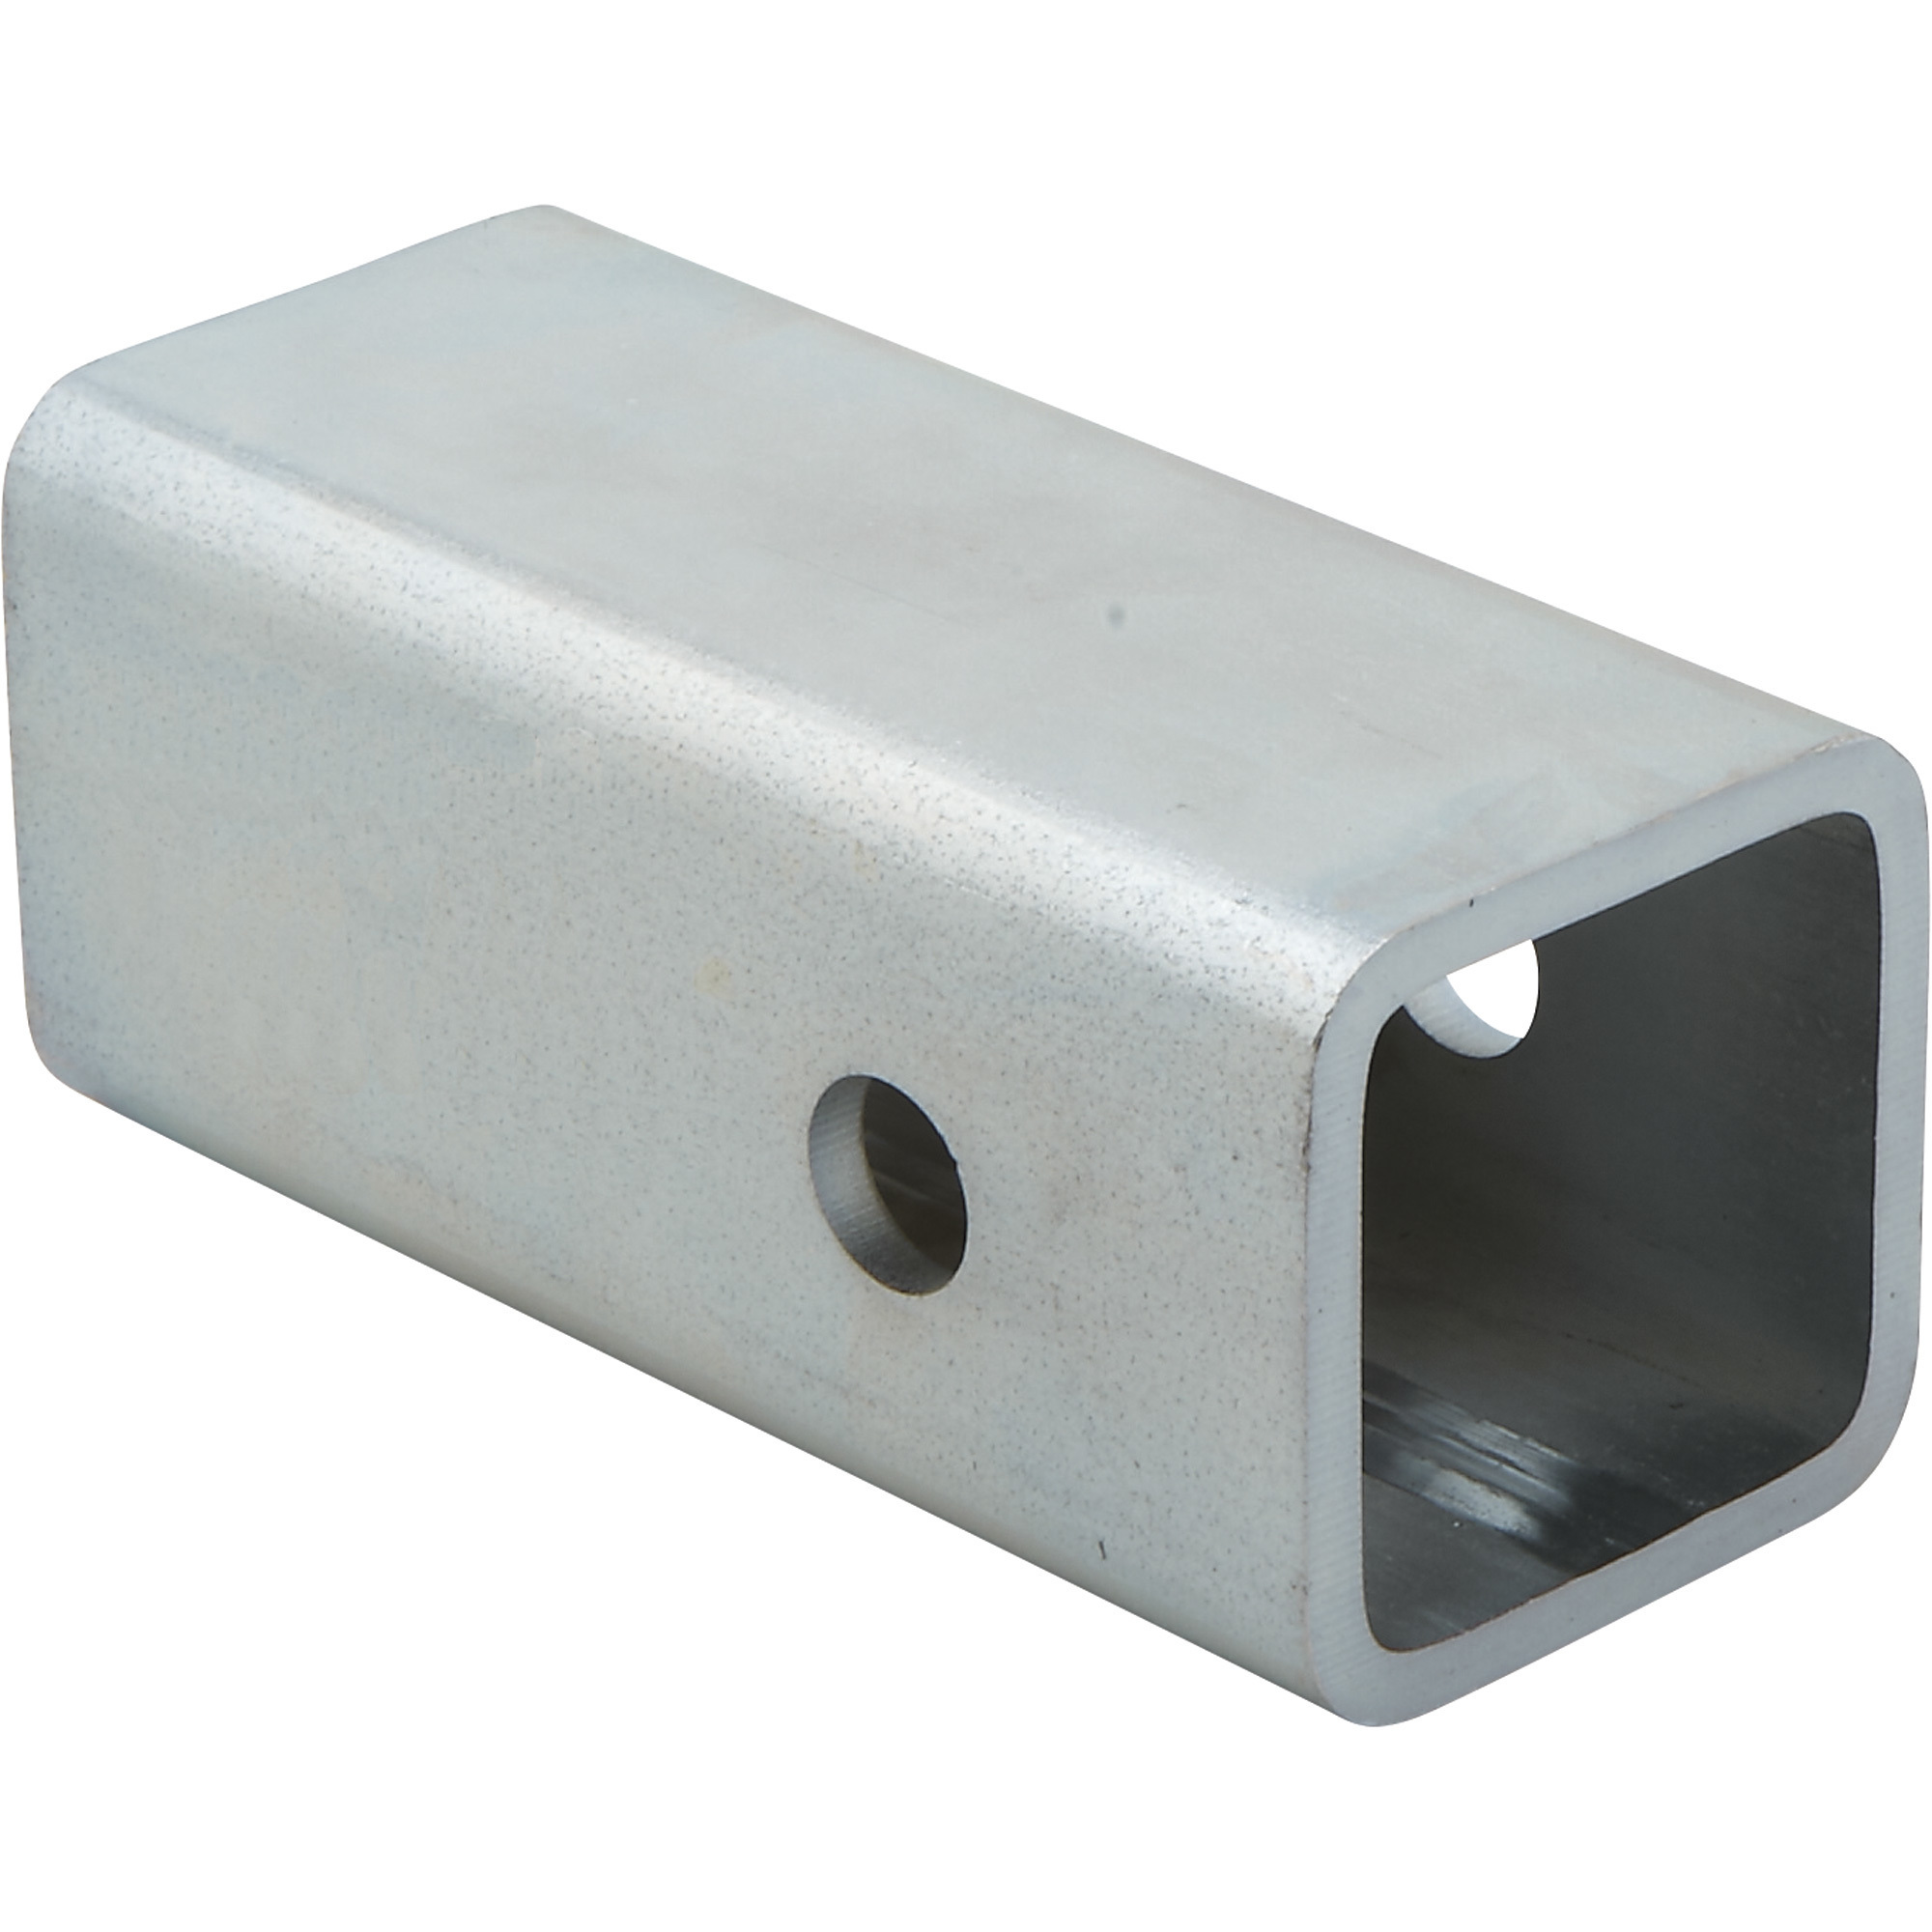 Ultra-Tow Hitch Adapter, Adapts 2 1/2Inch Opening to Accept 2Inch Insert